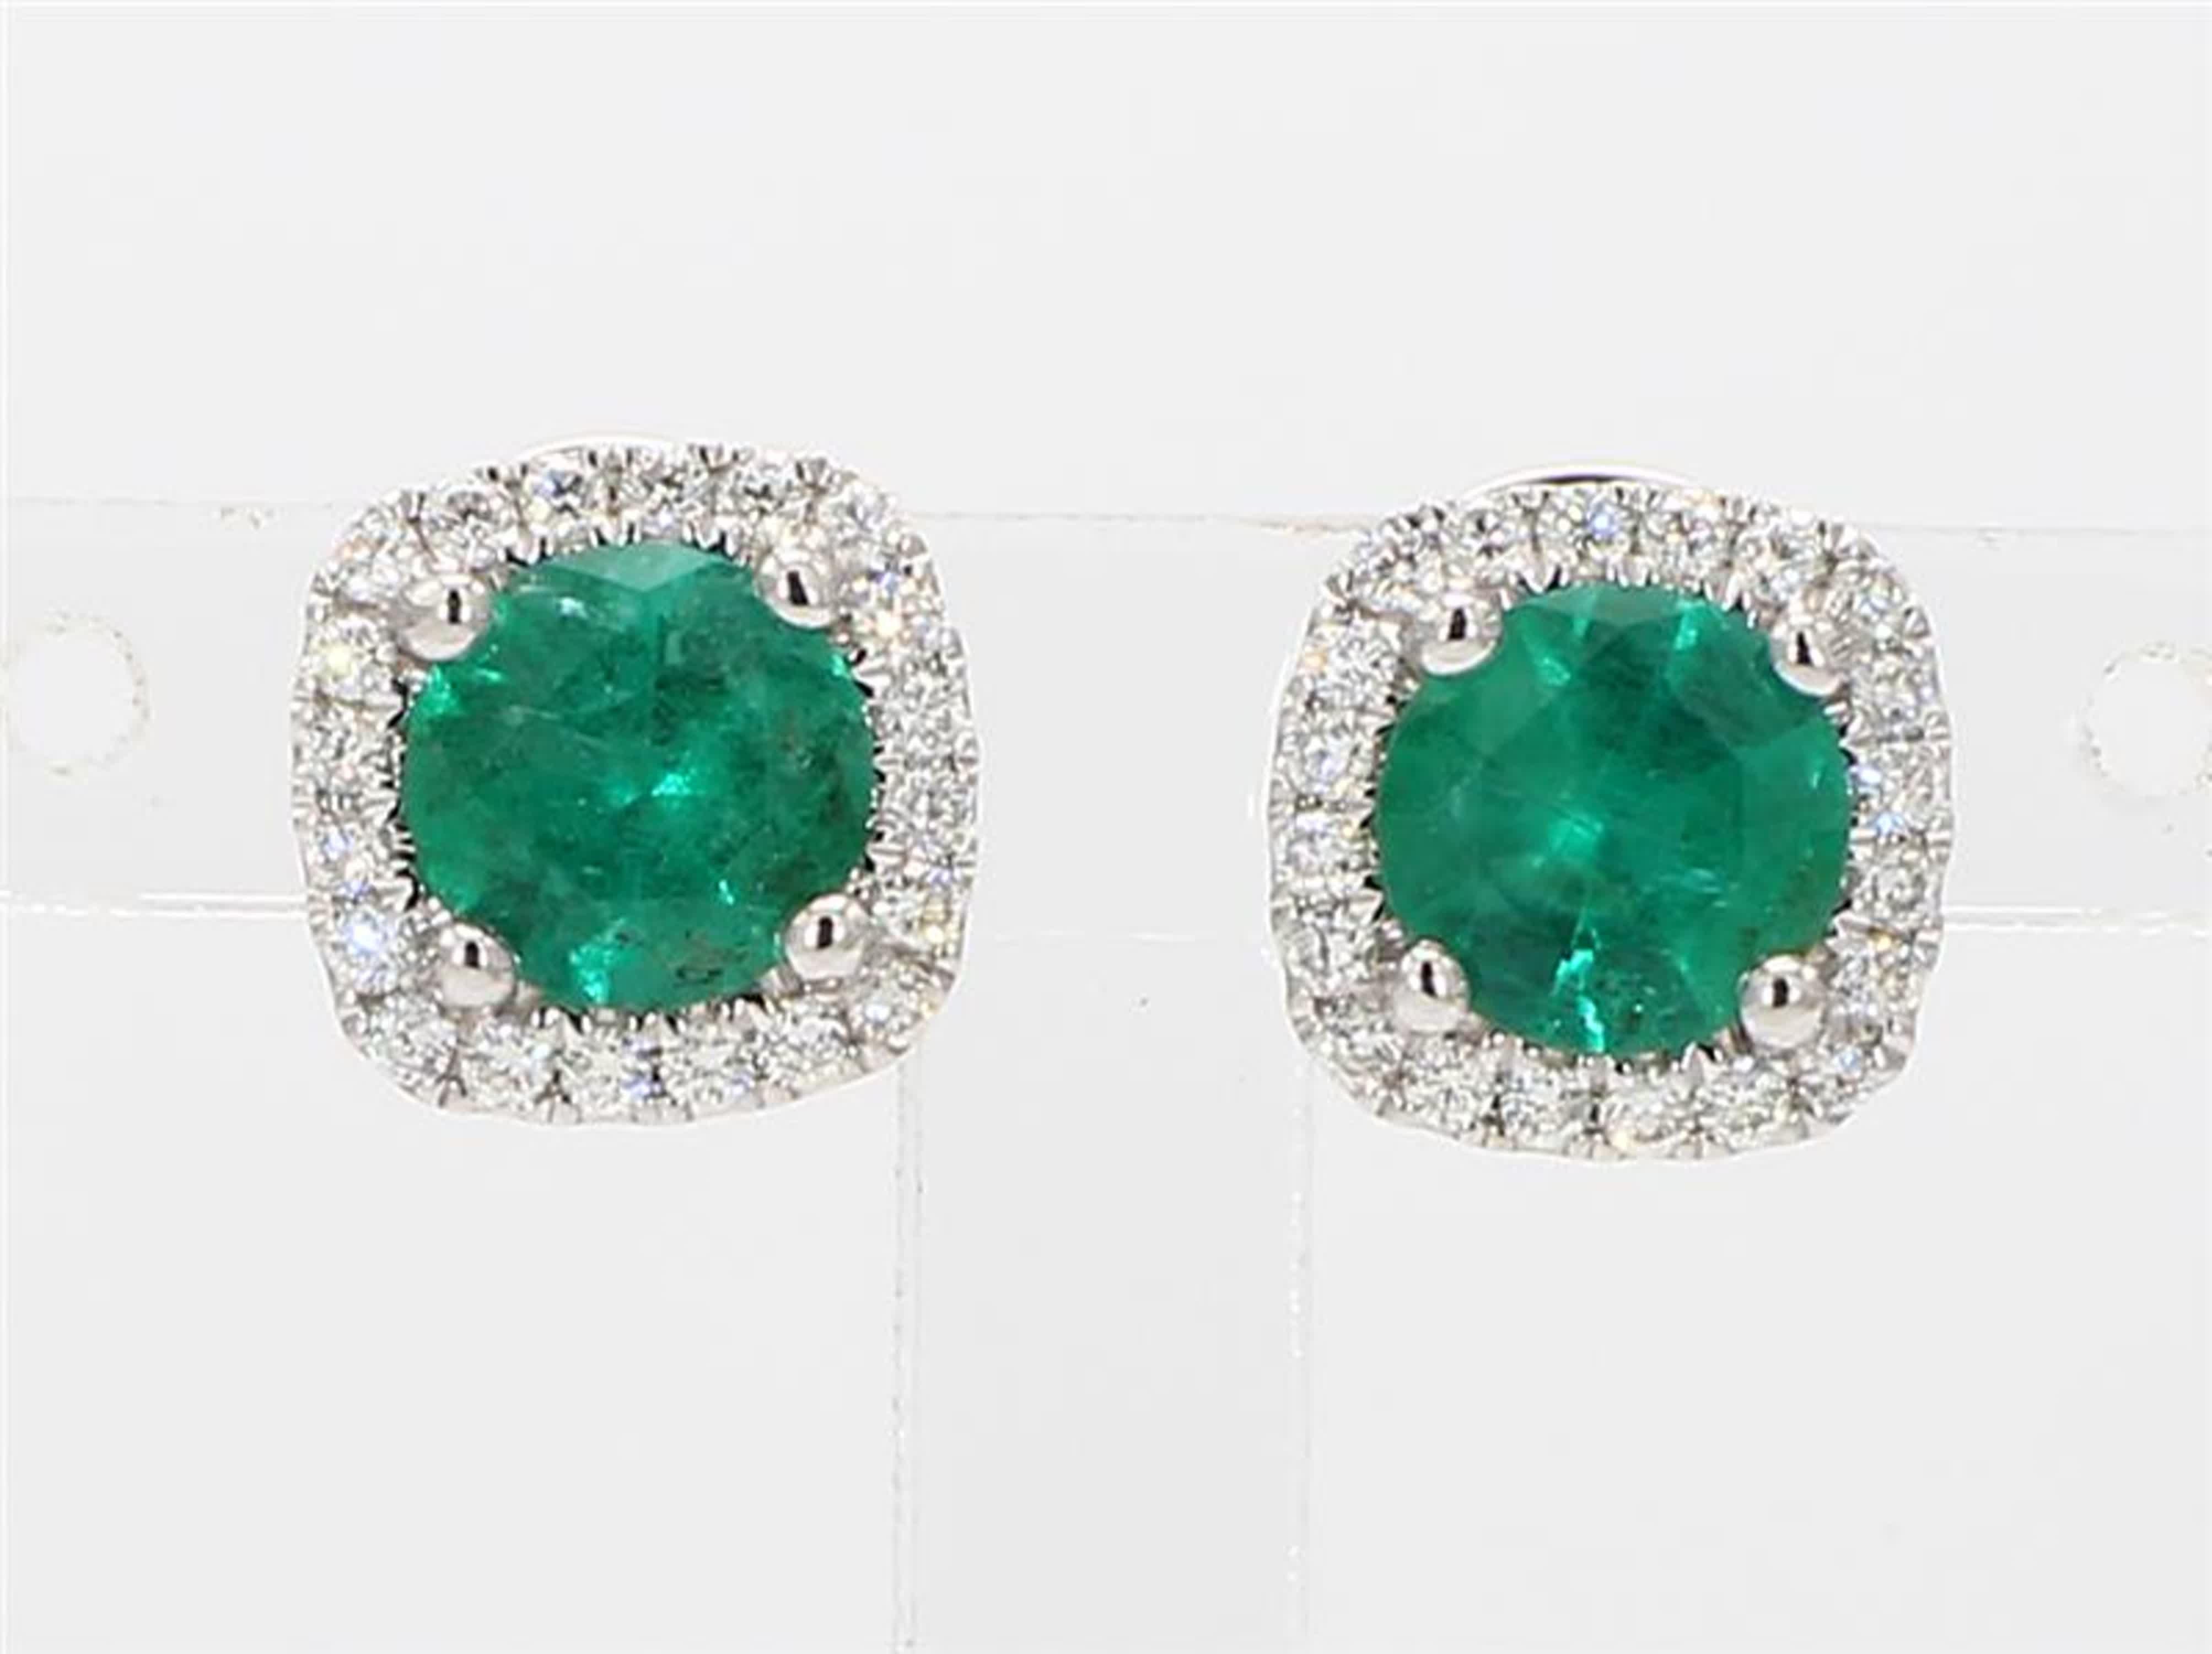 RareGemWorld's classic emerald earrings. Mounted in a beautiful 14K White Gold setting with natural round cut green emerald's. The emerald's are surrounded by natural round white diamond melee. These earrings are guaranteed to impress and enhance